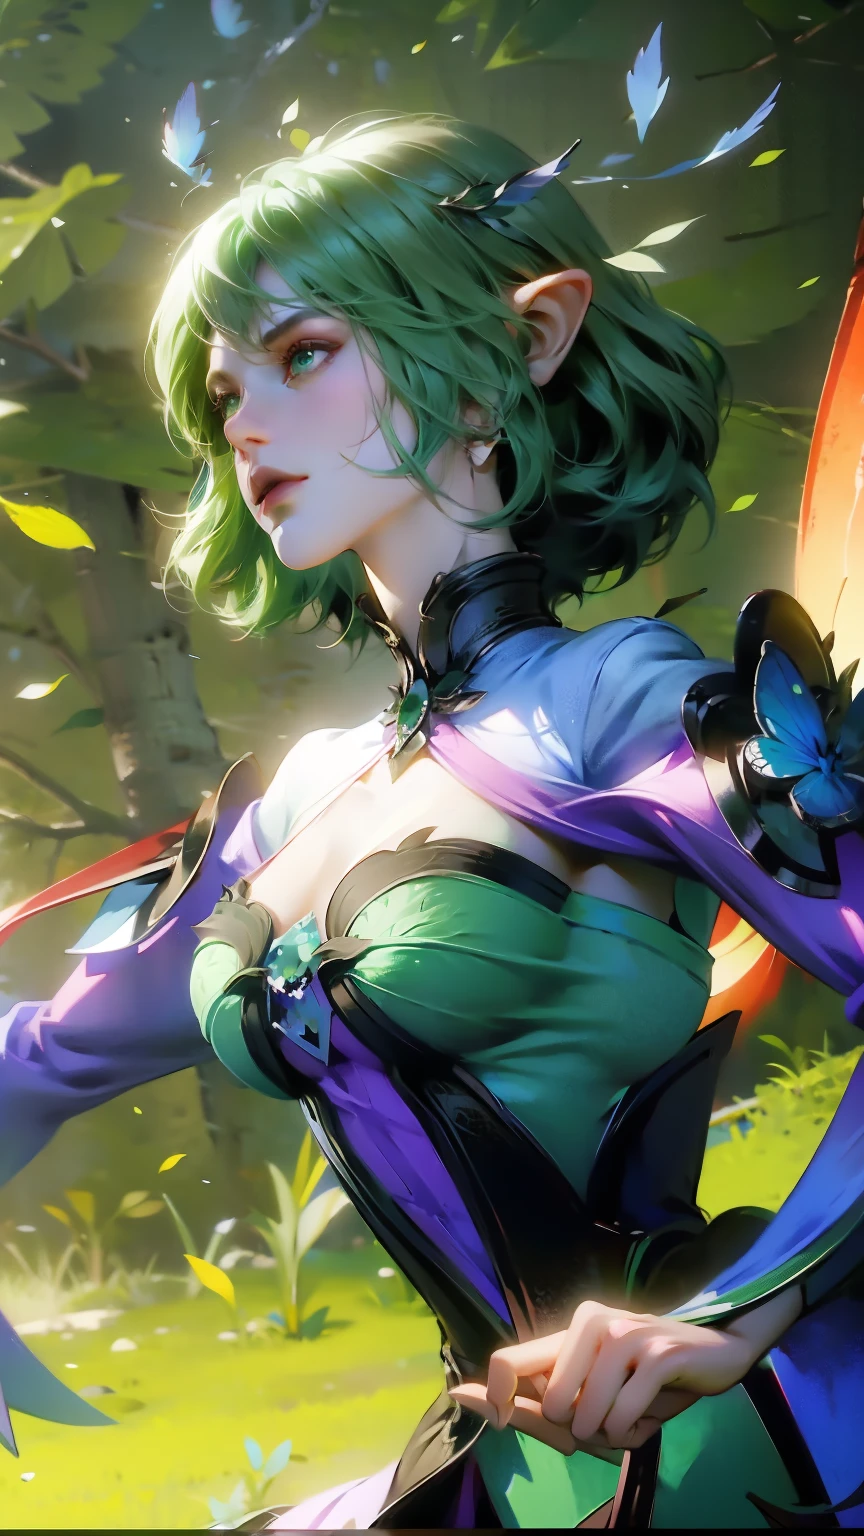 Wearing green and black clothing、Anime girl with wings and green background, Elf character, Fairy, forest Fairy, Insect trainer girl, brunette elf with Fairy wings, Elf, Cute 3D anime girl rendering, April rendering, Fairy dance, Dynamic sense
